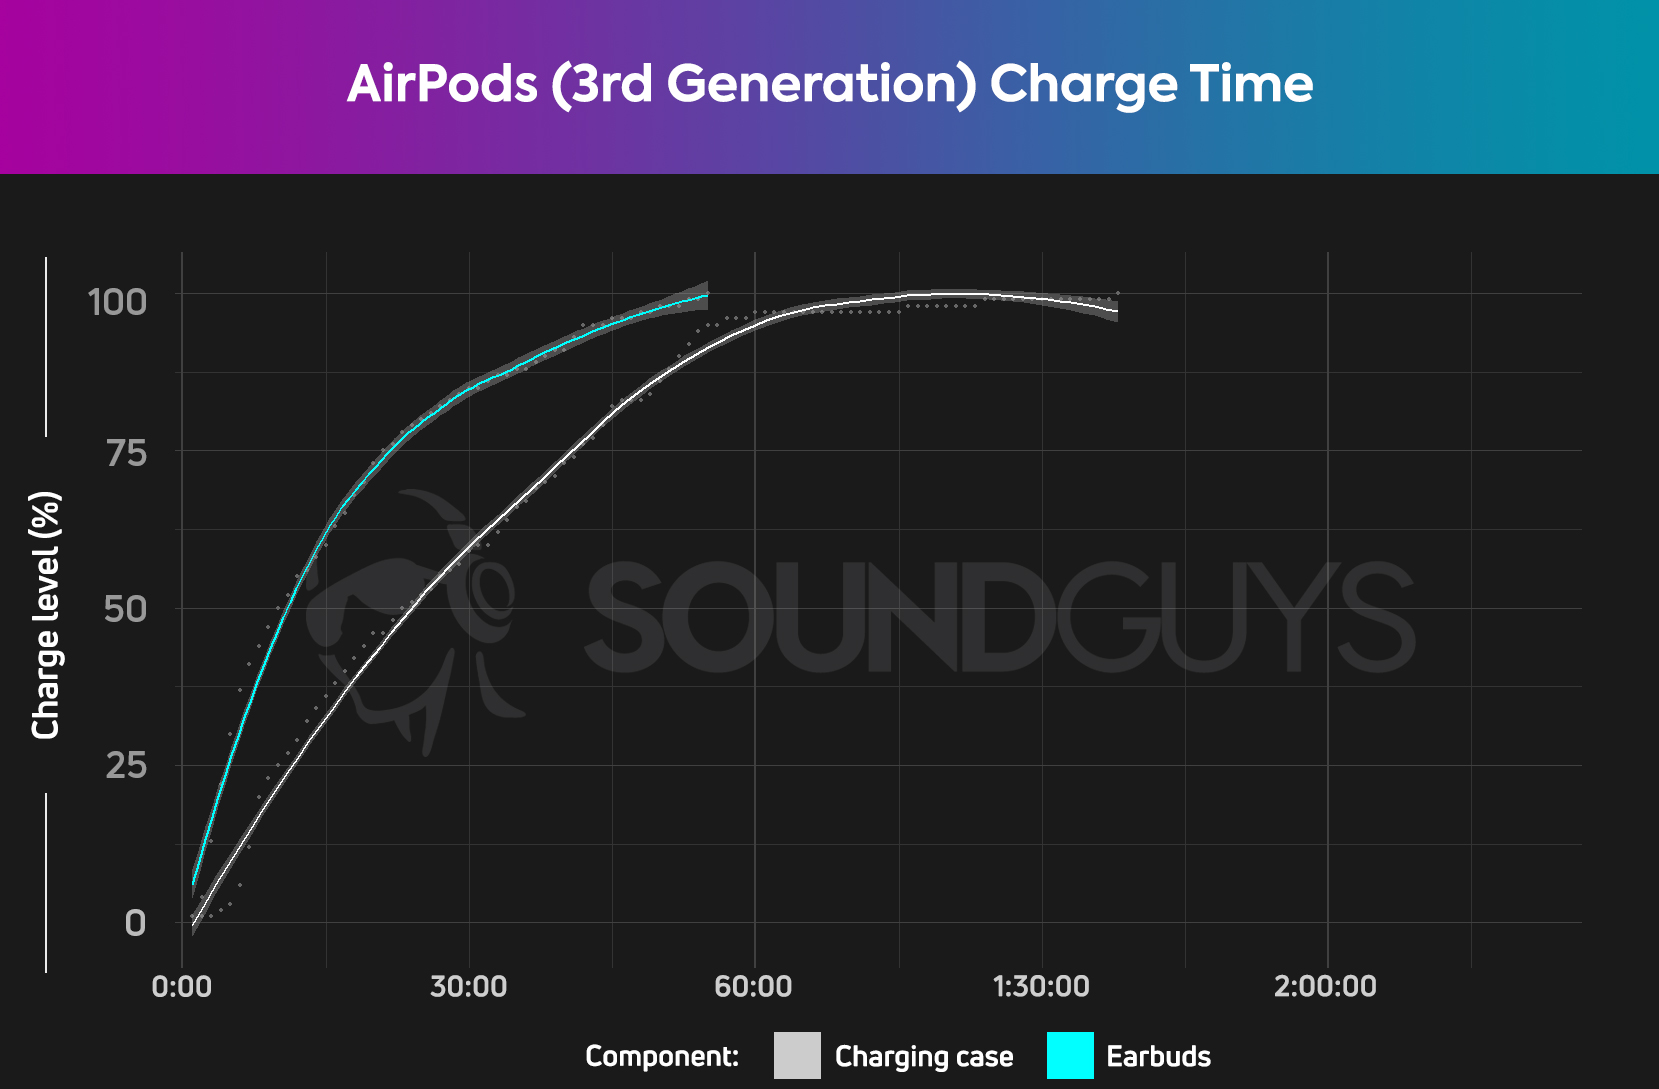 A plot showing the charge percentage over time for the Apple AirPods (3rd generation).